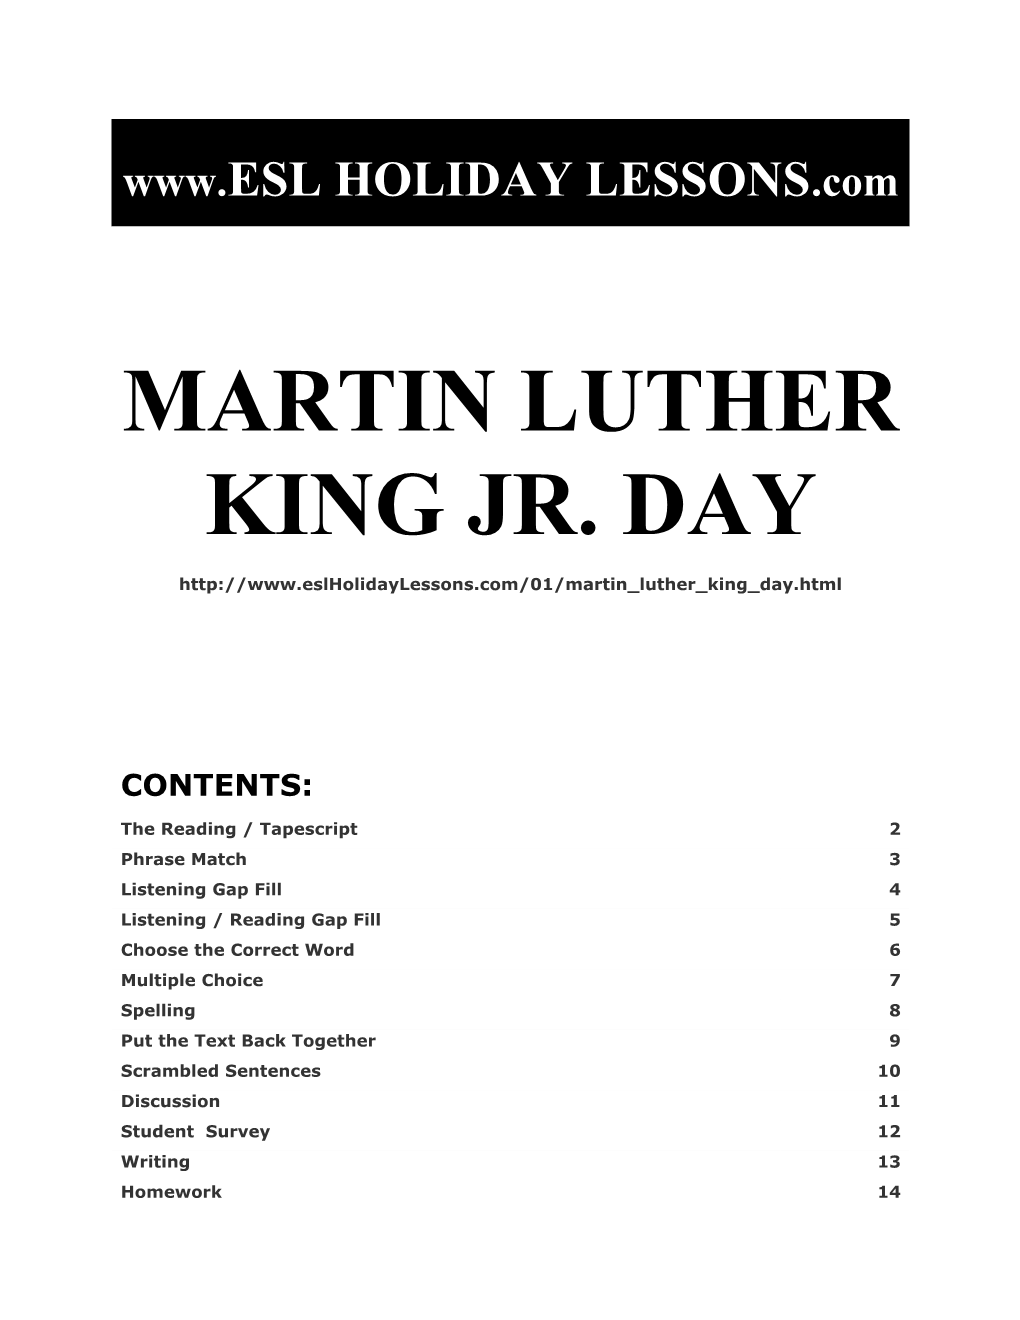 Holiday Lessons - Martin Luther King Jr. Day